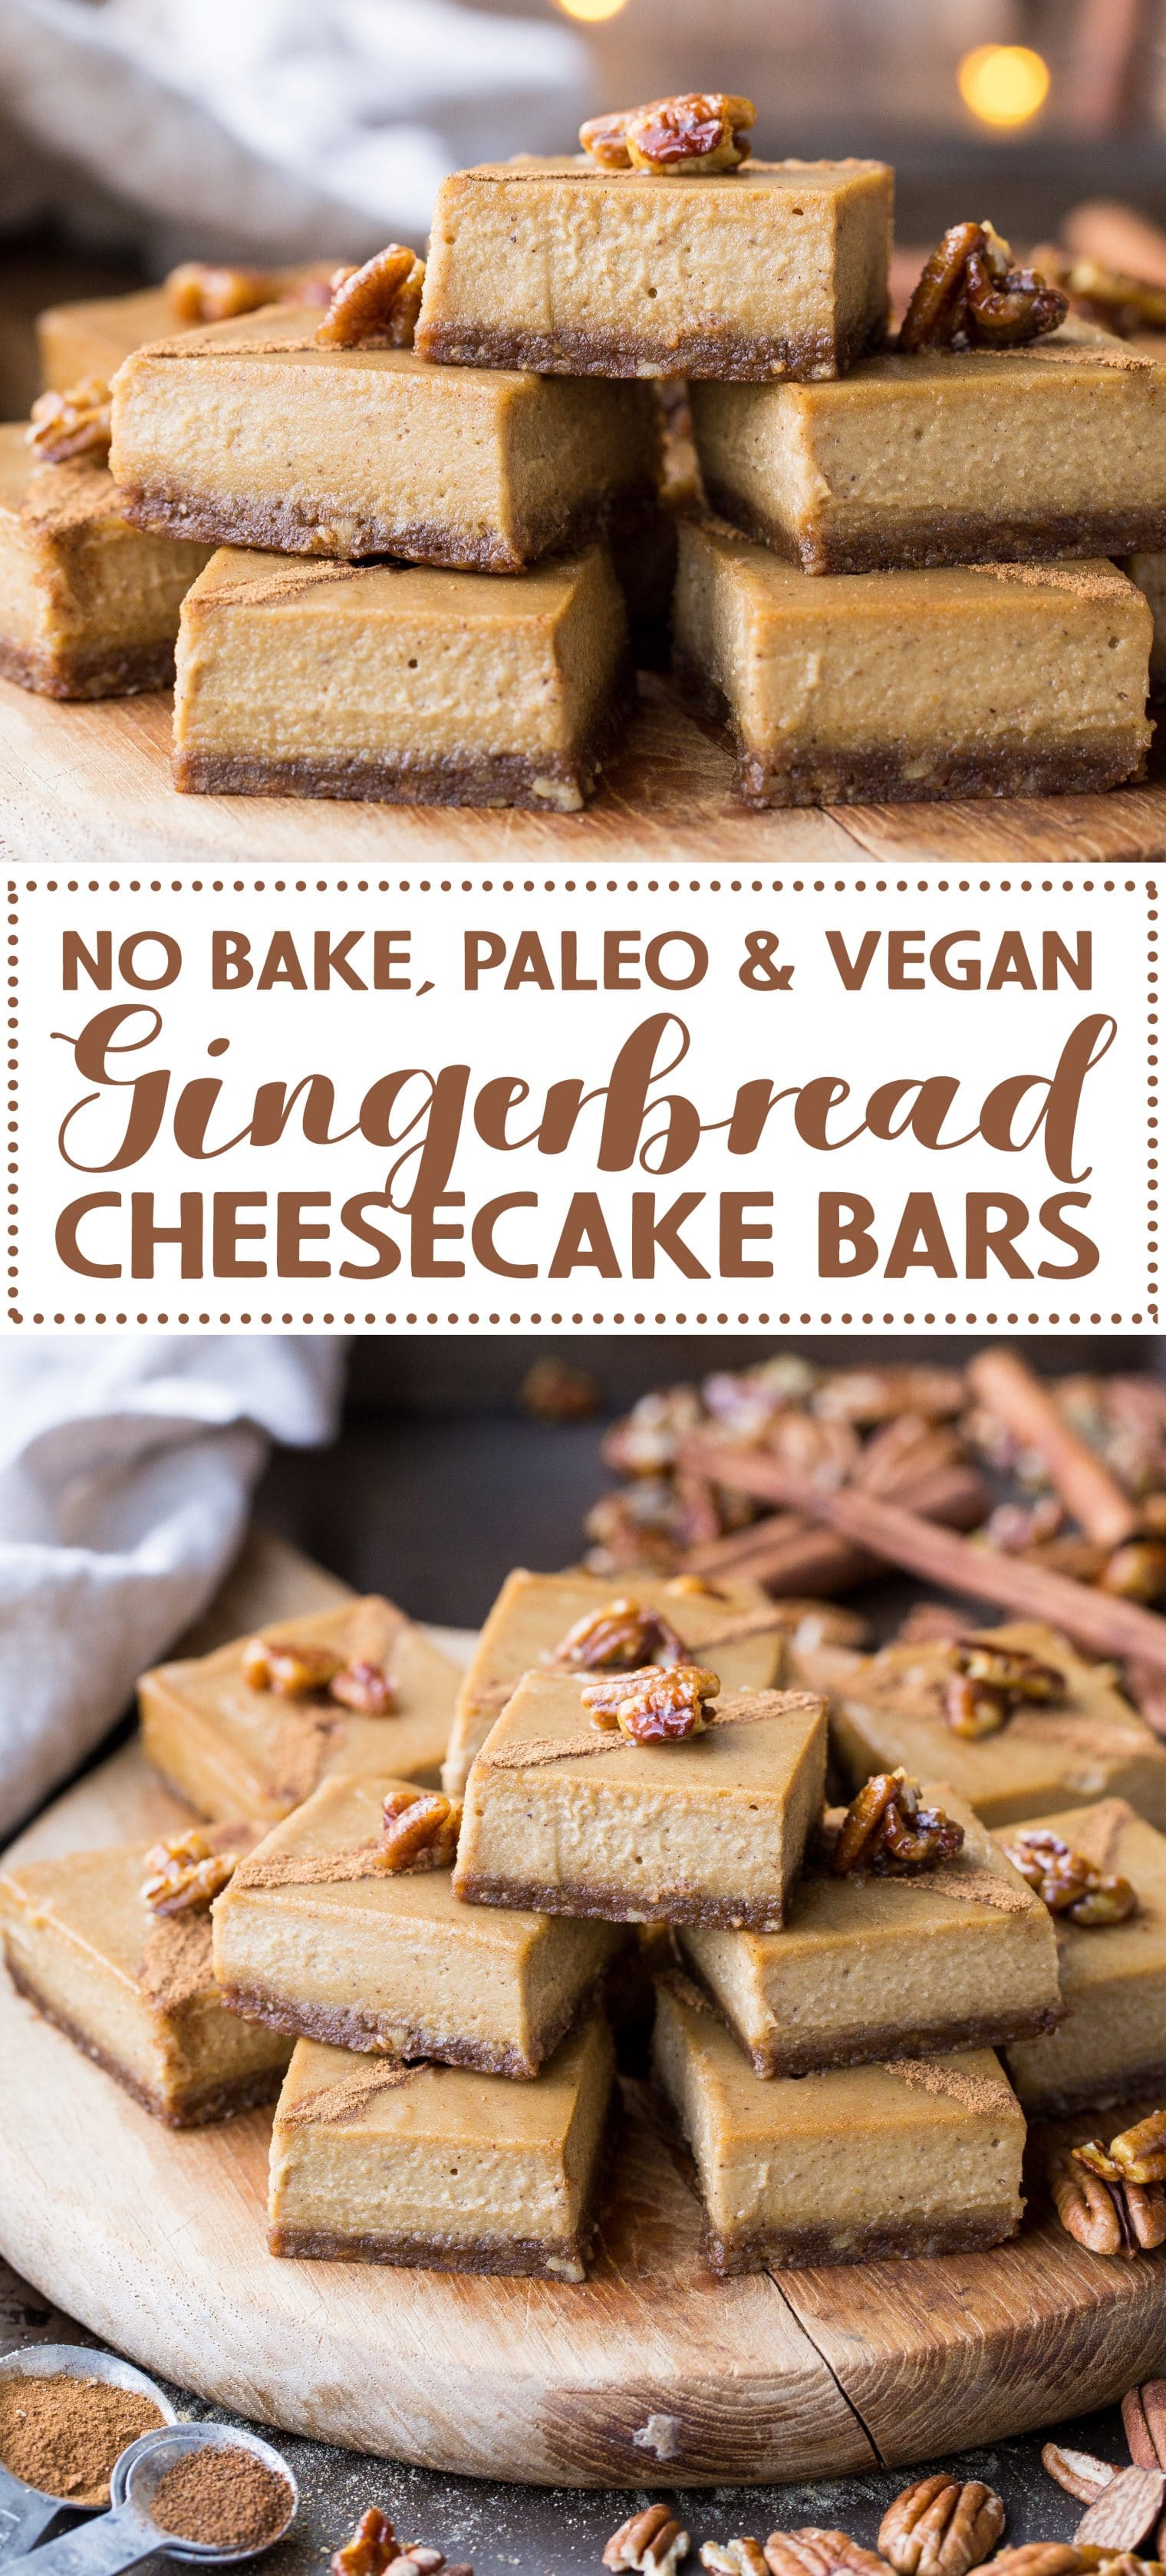 With an easy pecan-and-date crust and tons of warm spices, these Gingerbread Cheesecake Bars are packed with the holiday season’s warm flavors. These “cheesecake” bars are made with soaked cashews to replicate cheesecake’s creamy texture—no dairy or baking necessary. You won’t miss the dairy one bit in these gluten-free, vegan bars. 